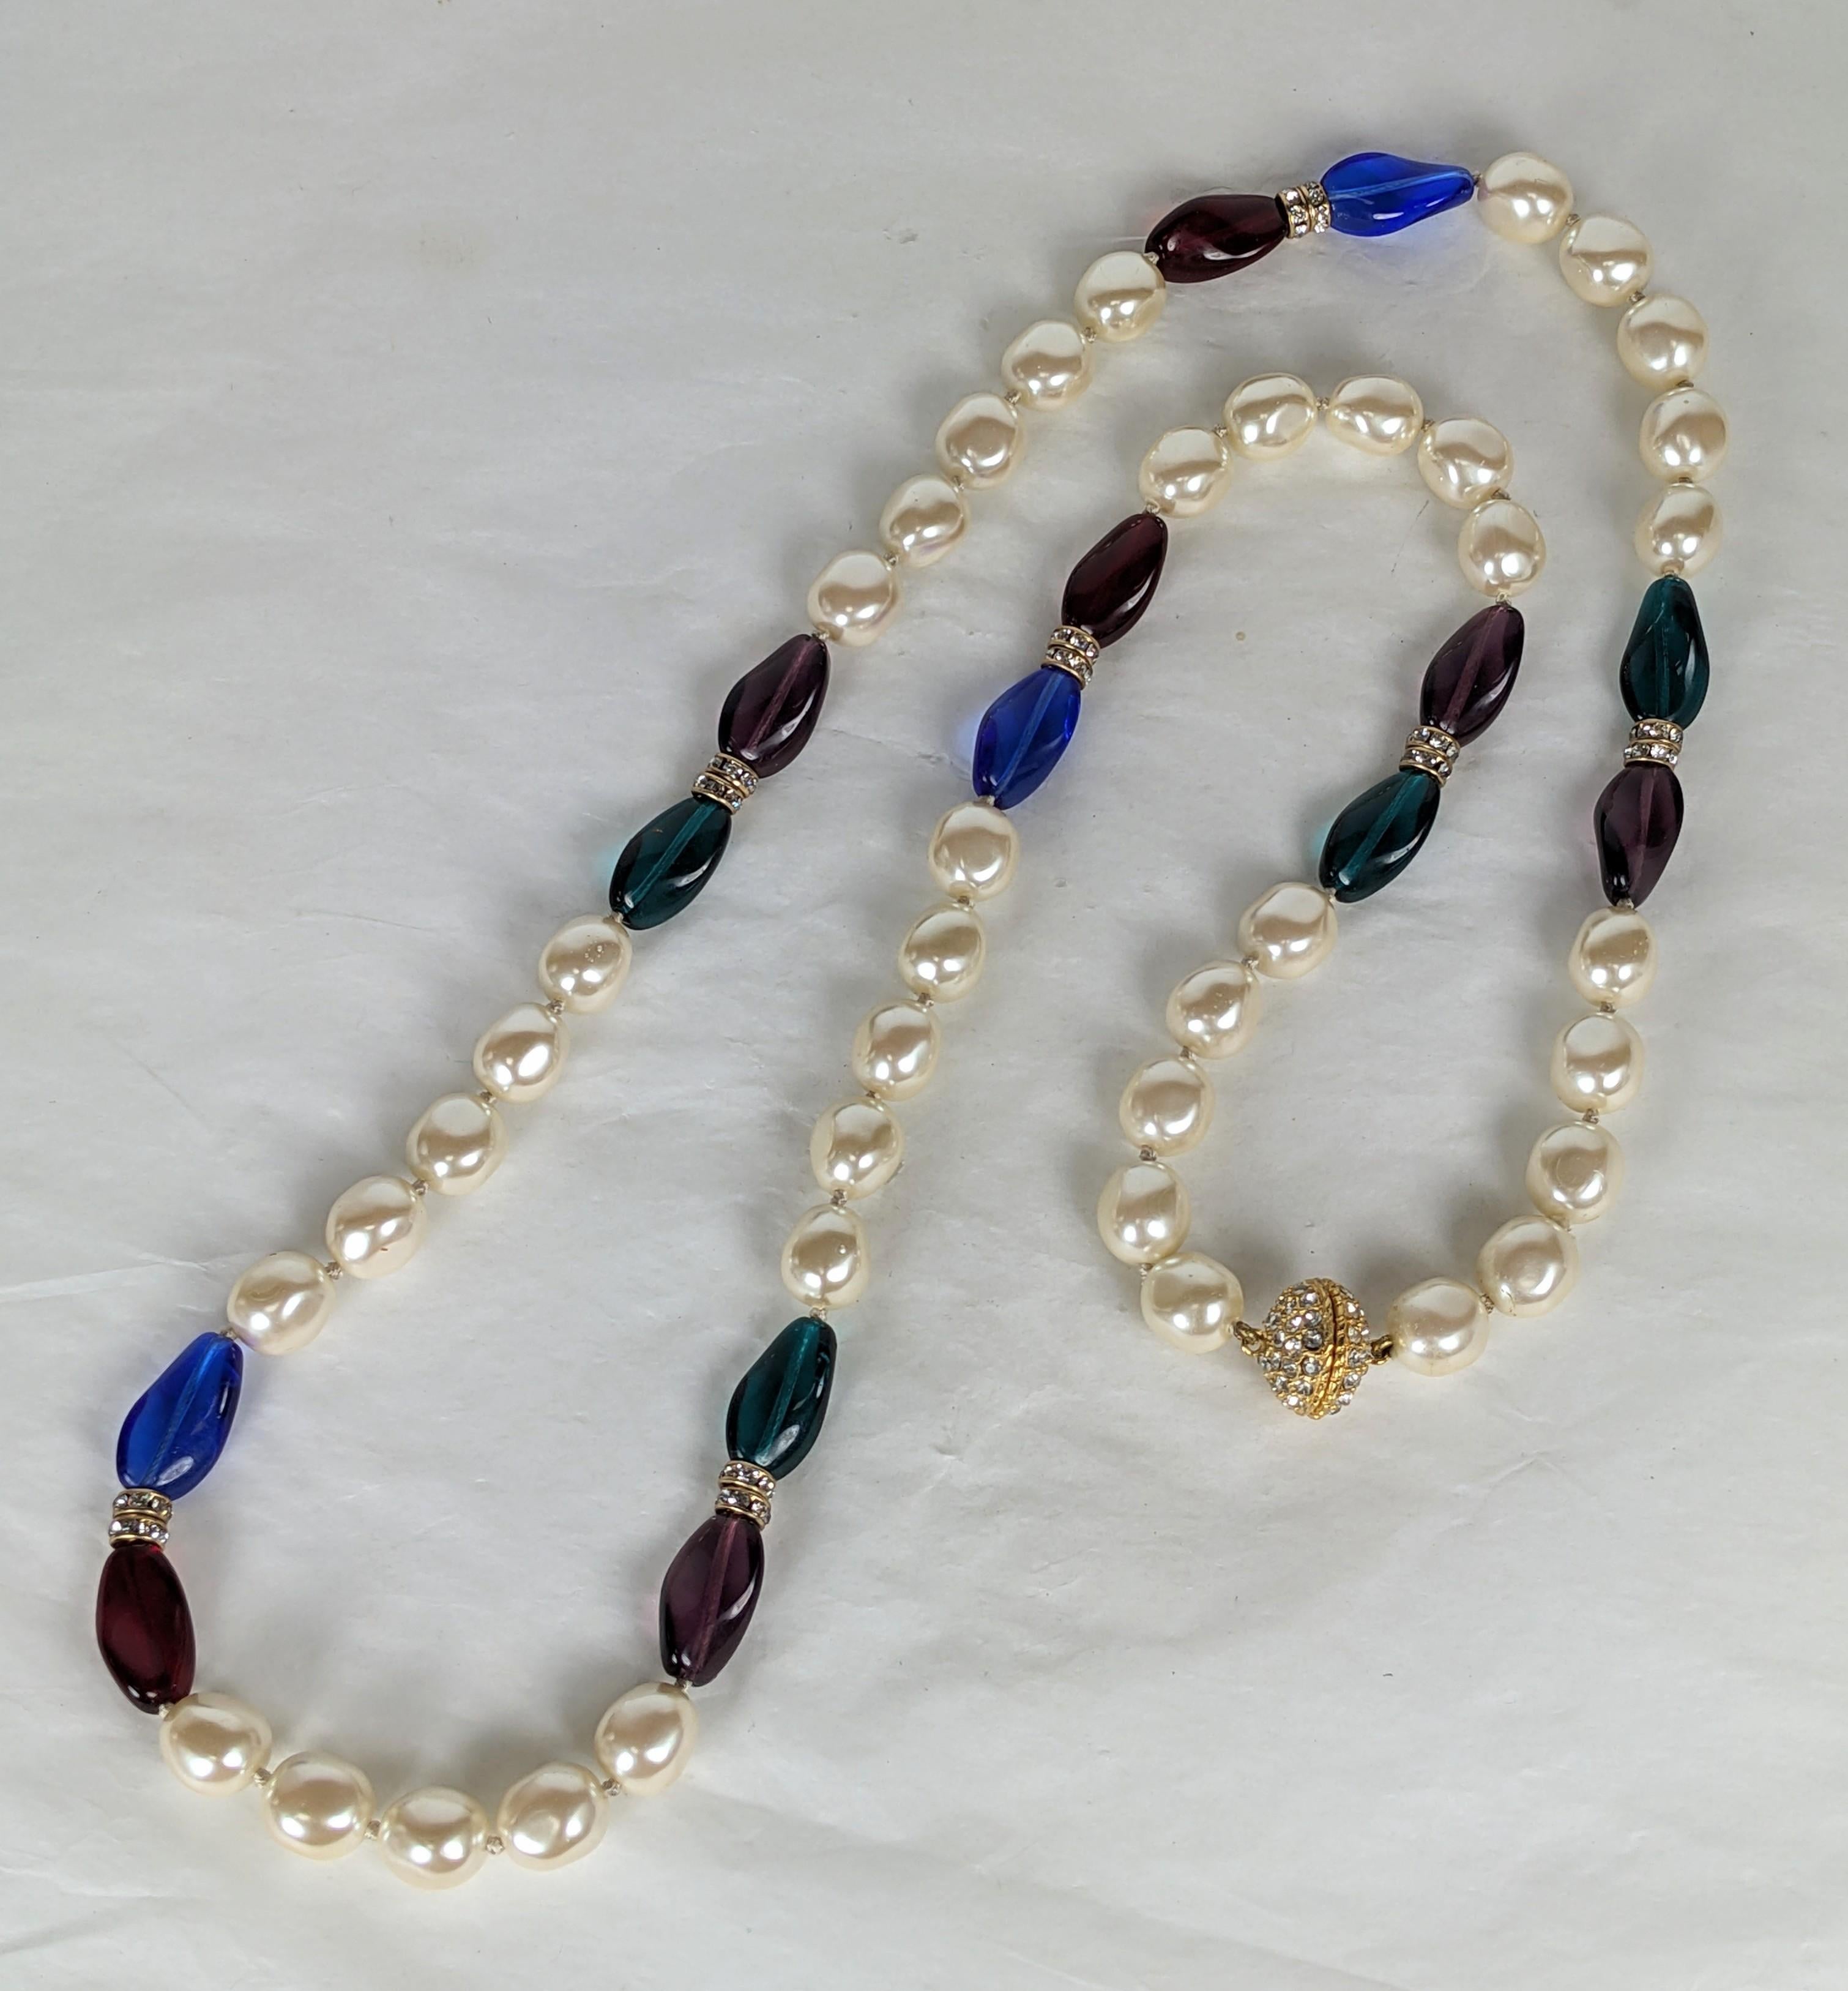 Elegant Chanel Style Pearl and Pate de Verre Sautoir from the 1990's. High quality faux jewelry made in Italy with hand knotted pearls, glass beads with crystal rondels and pave snap clasp. 40